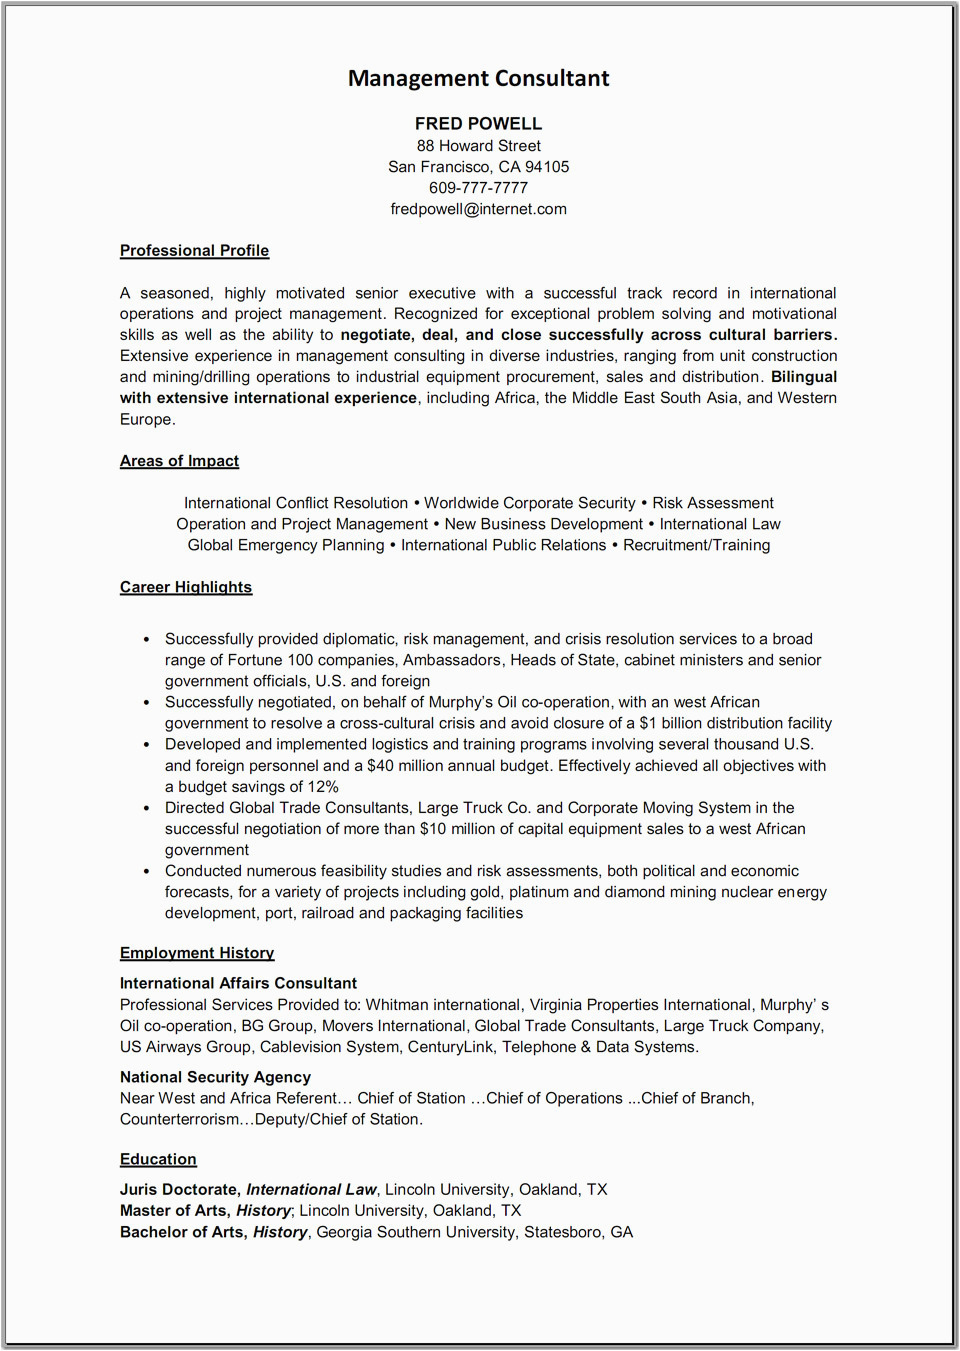 Degree In Progress On Resume Sample 12 13 How to List Experience On A Resume